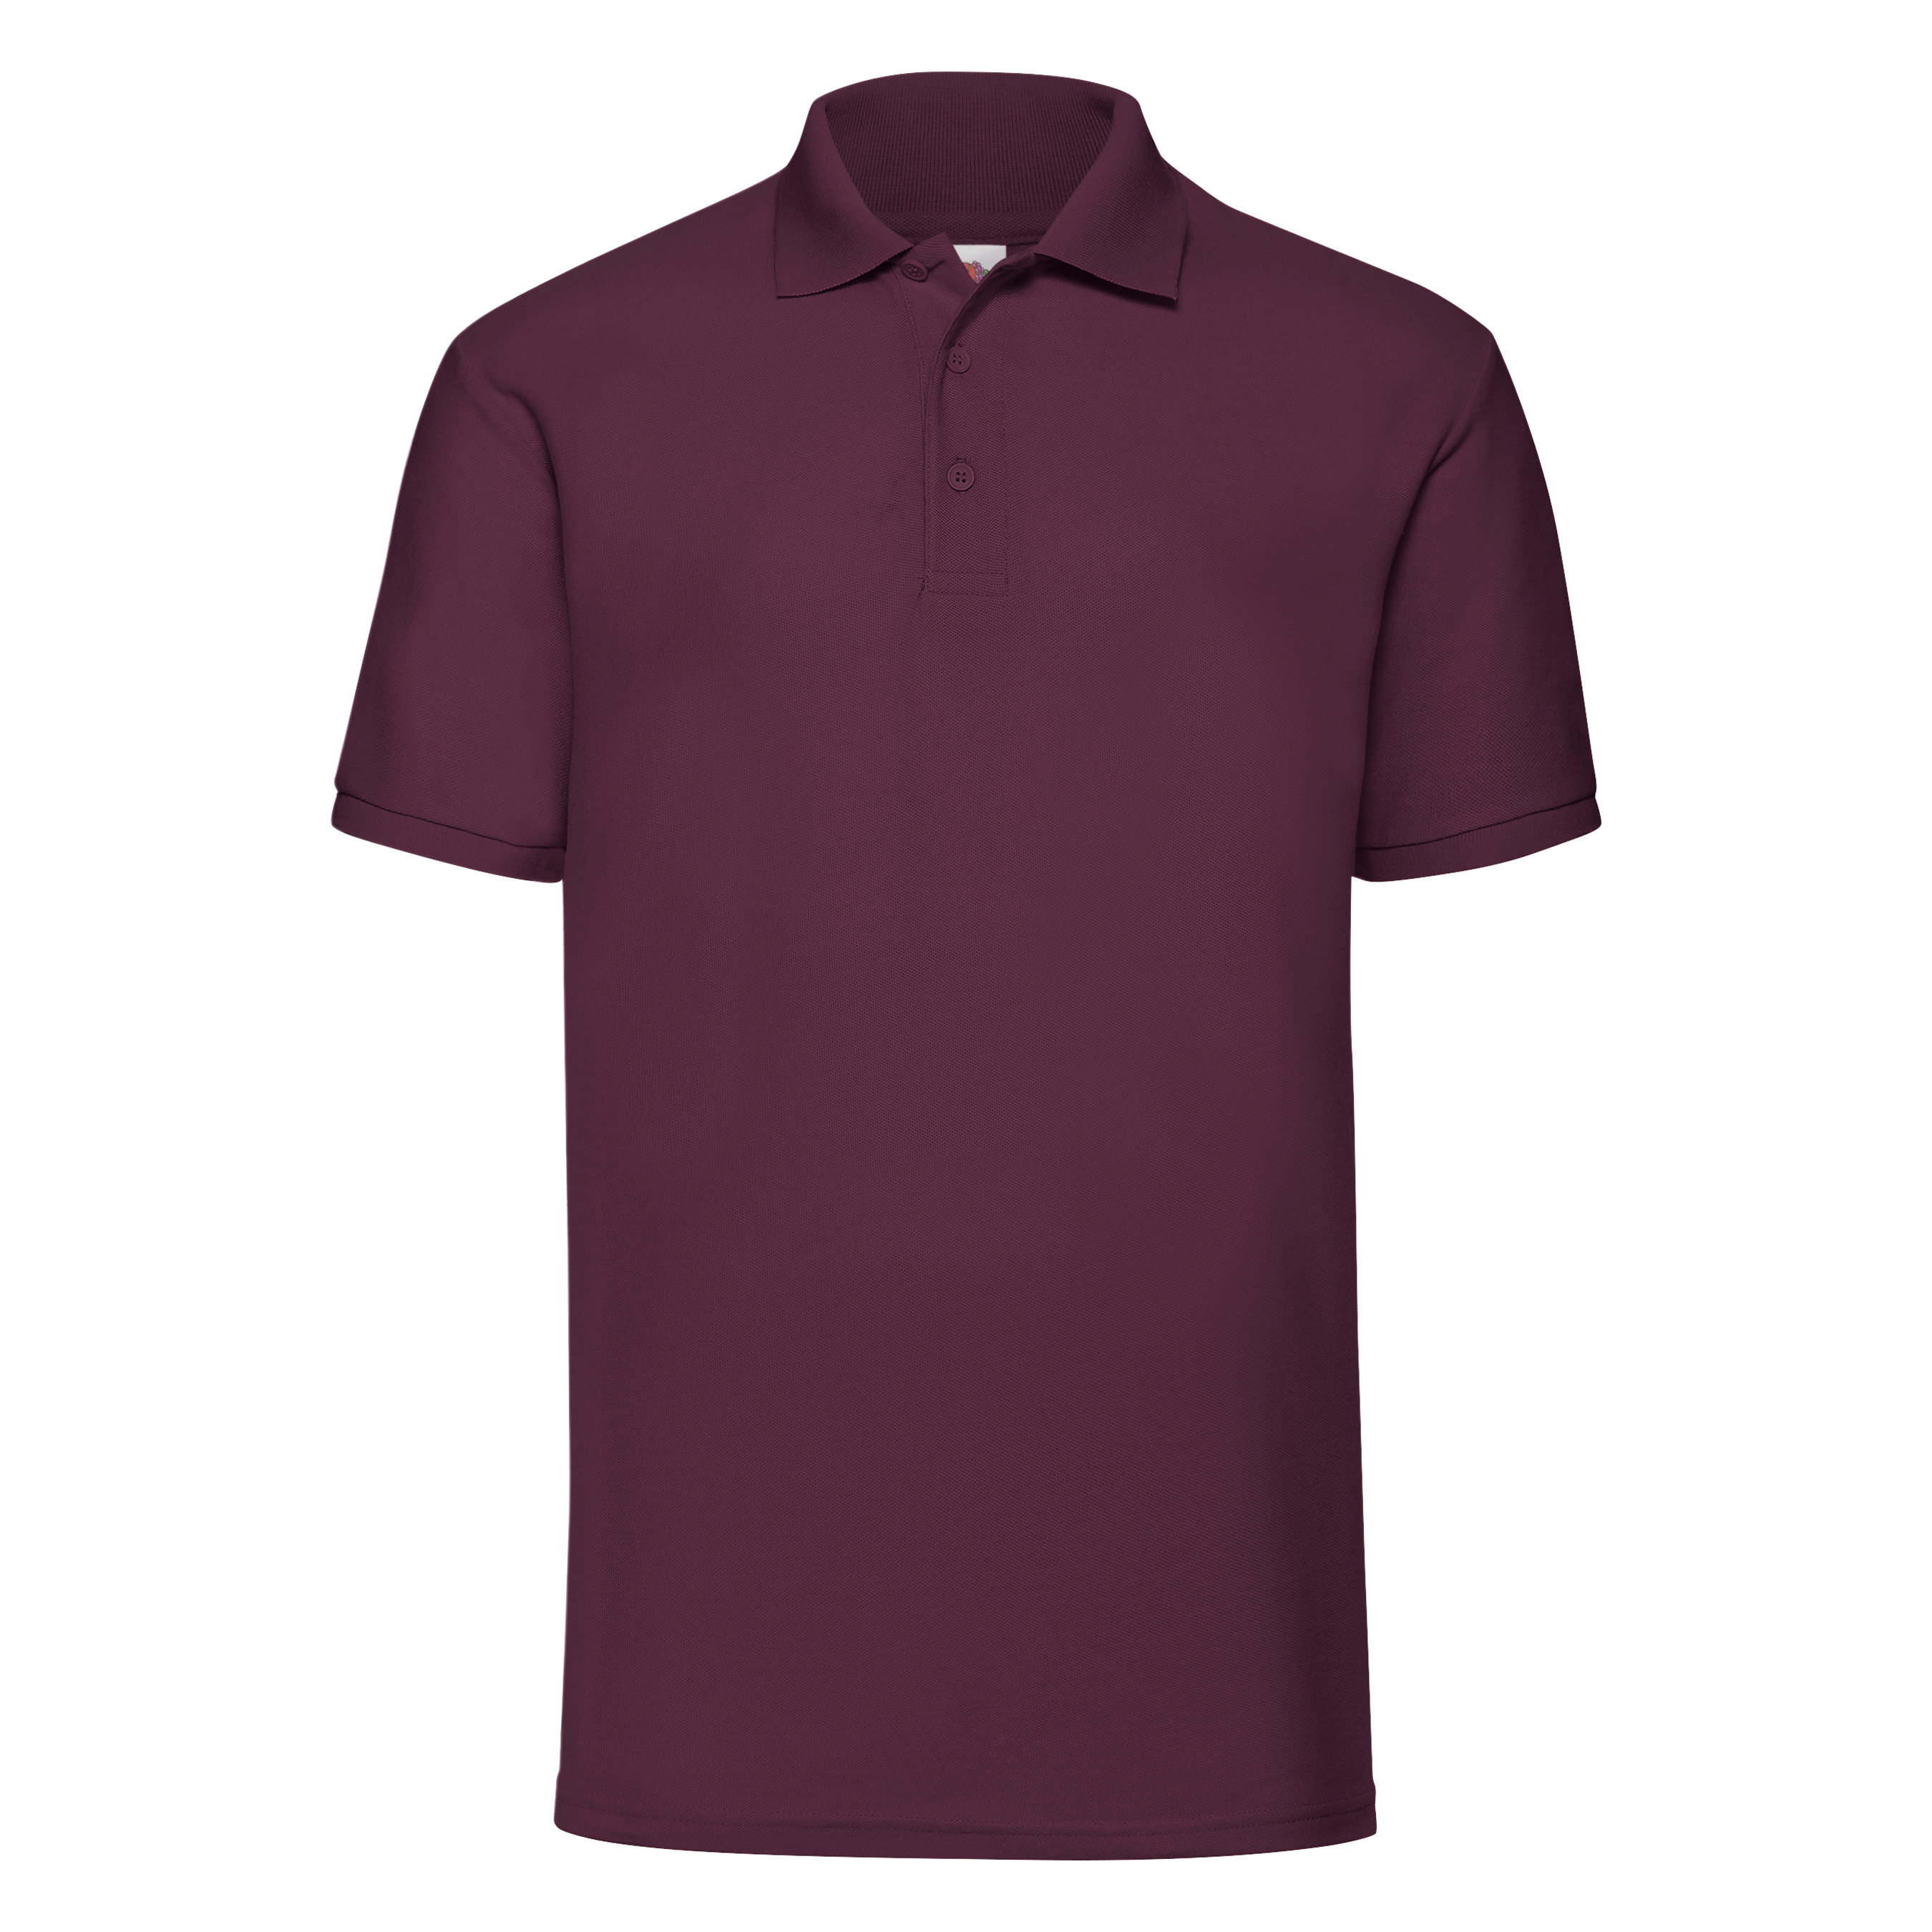 ax-httpswebsystems.s3.amazonaws.comtmp_for_downloadfruit-of-the-loom-65-35-polo-burgundy.jpg